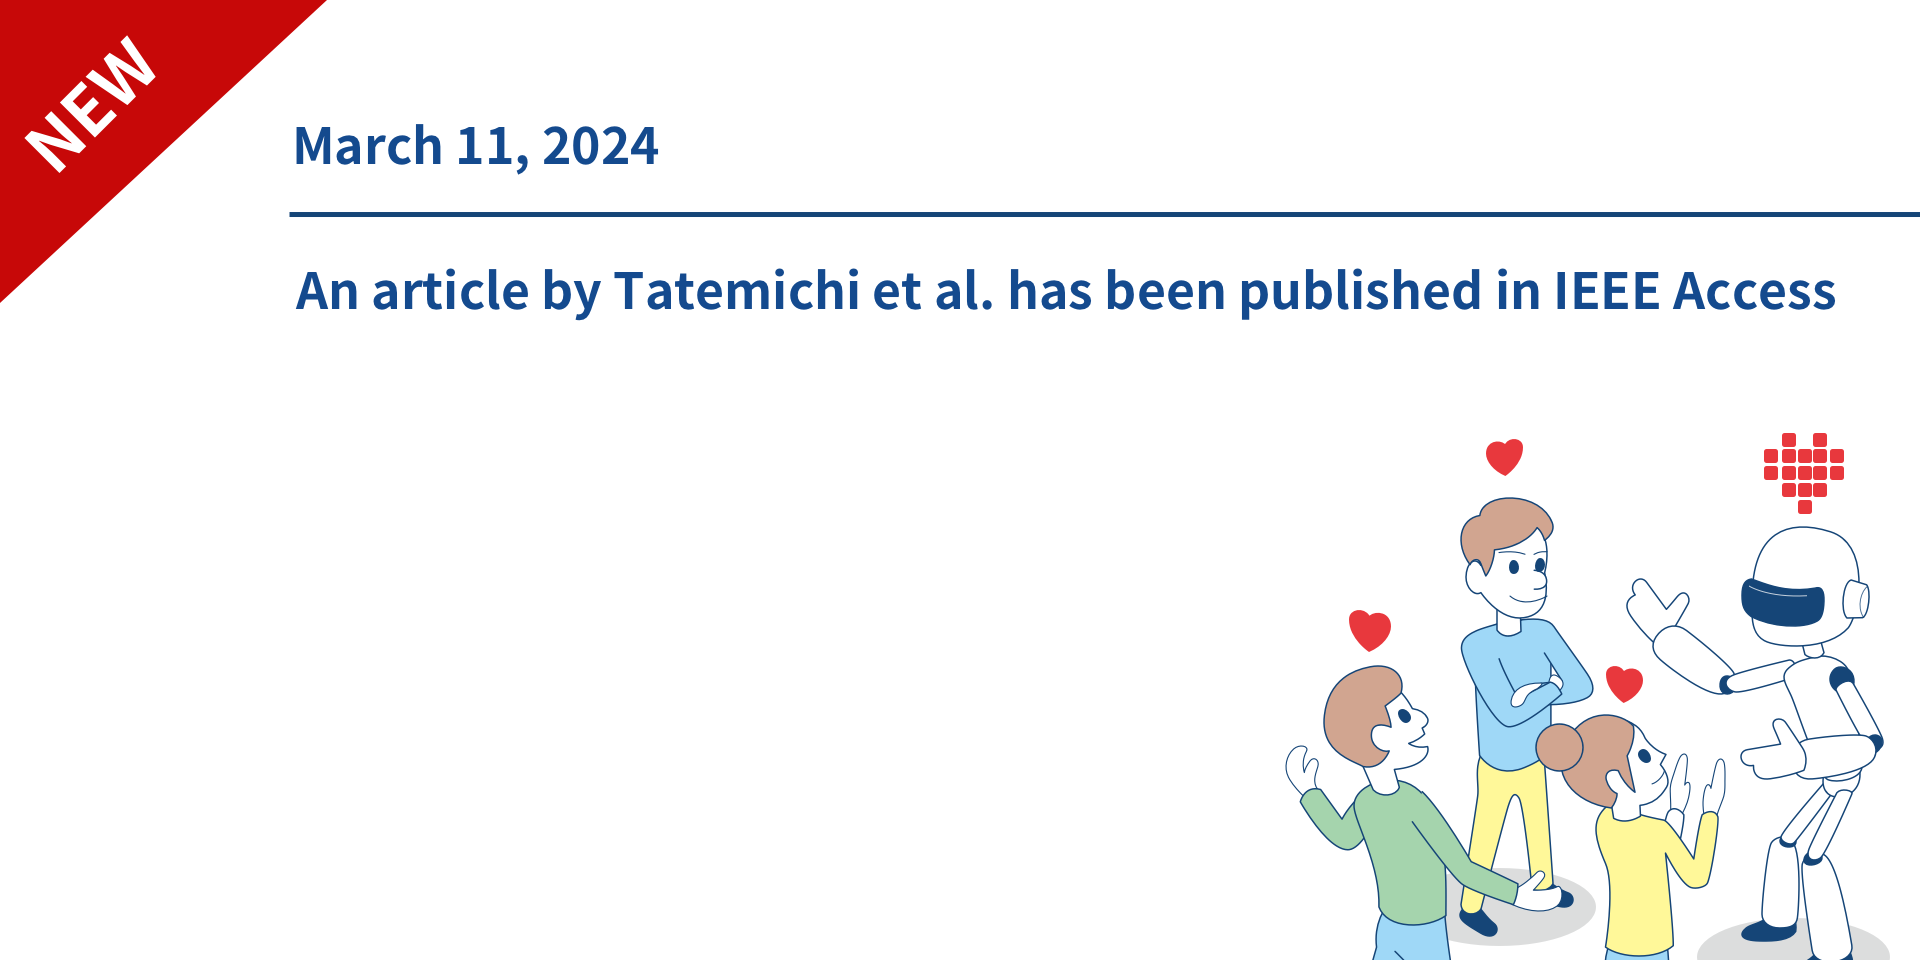 An article by Tatemichi et al. has been published in IEEE Access